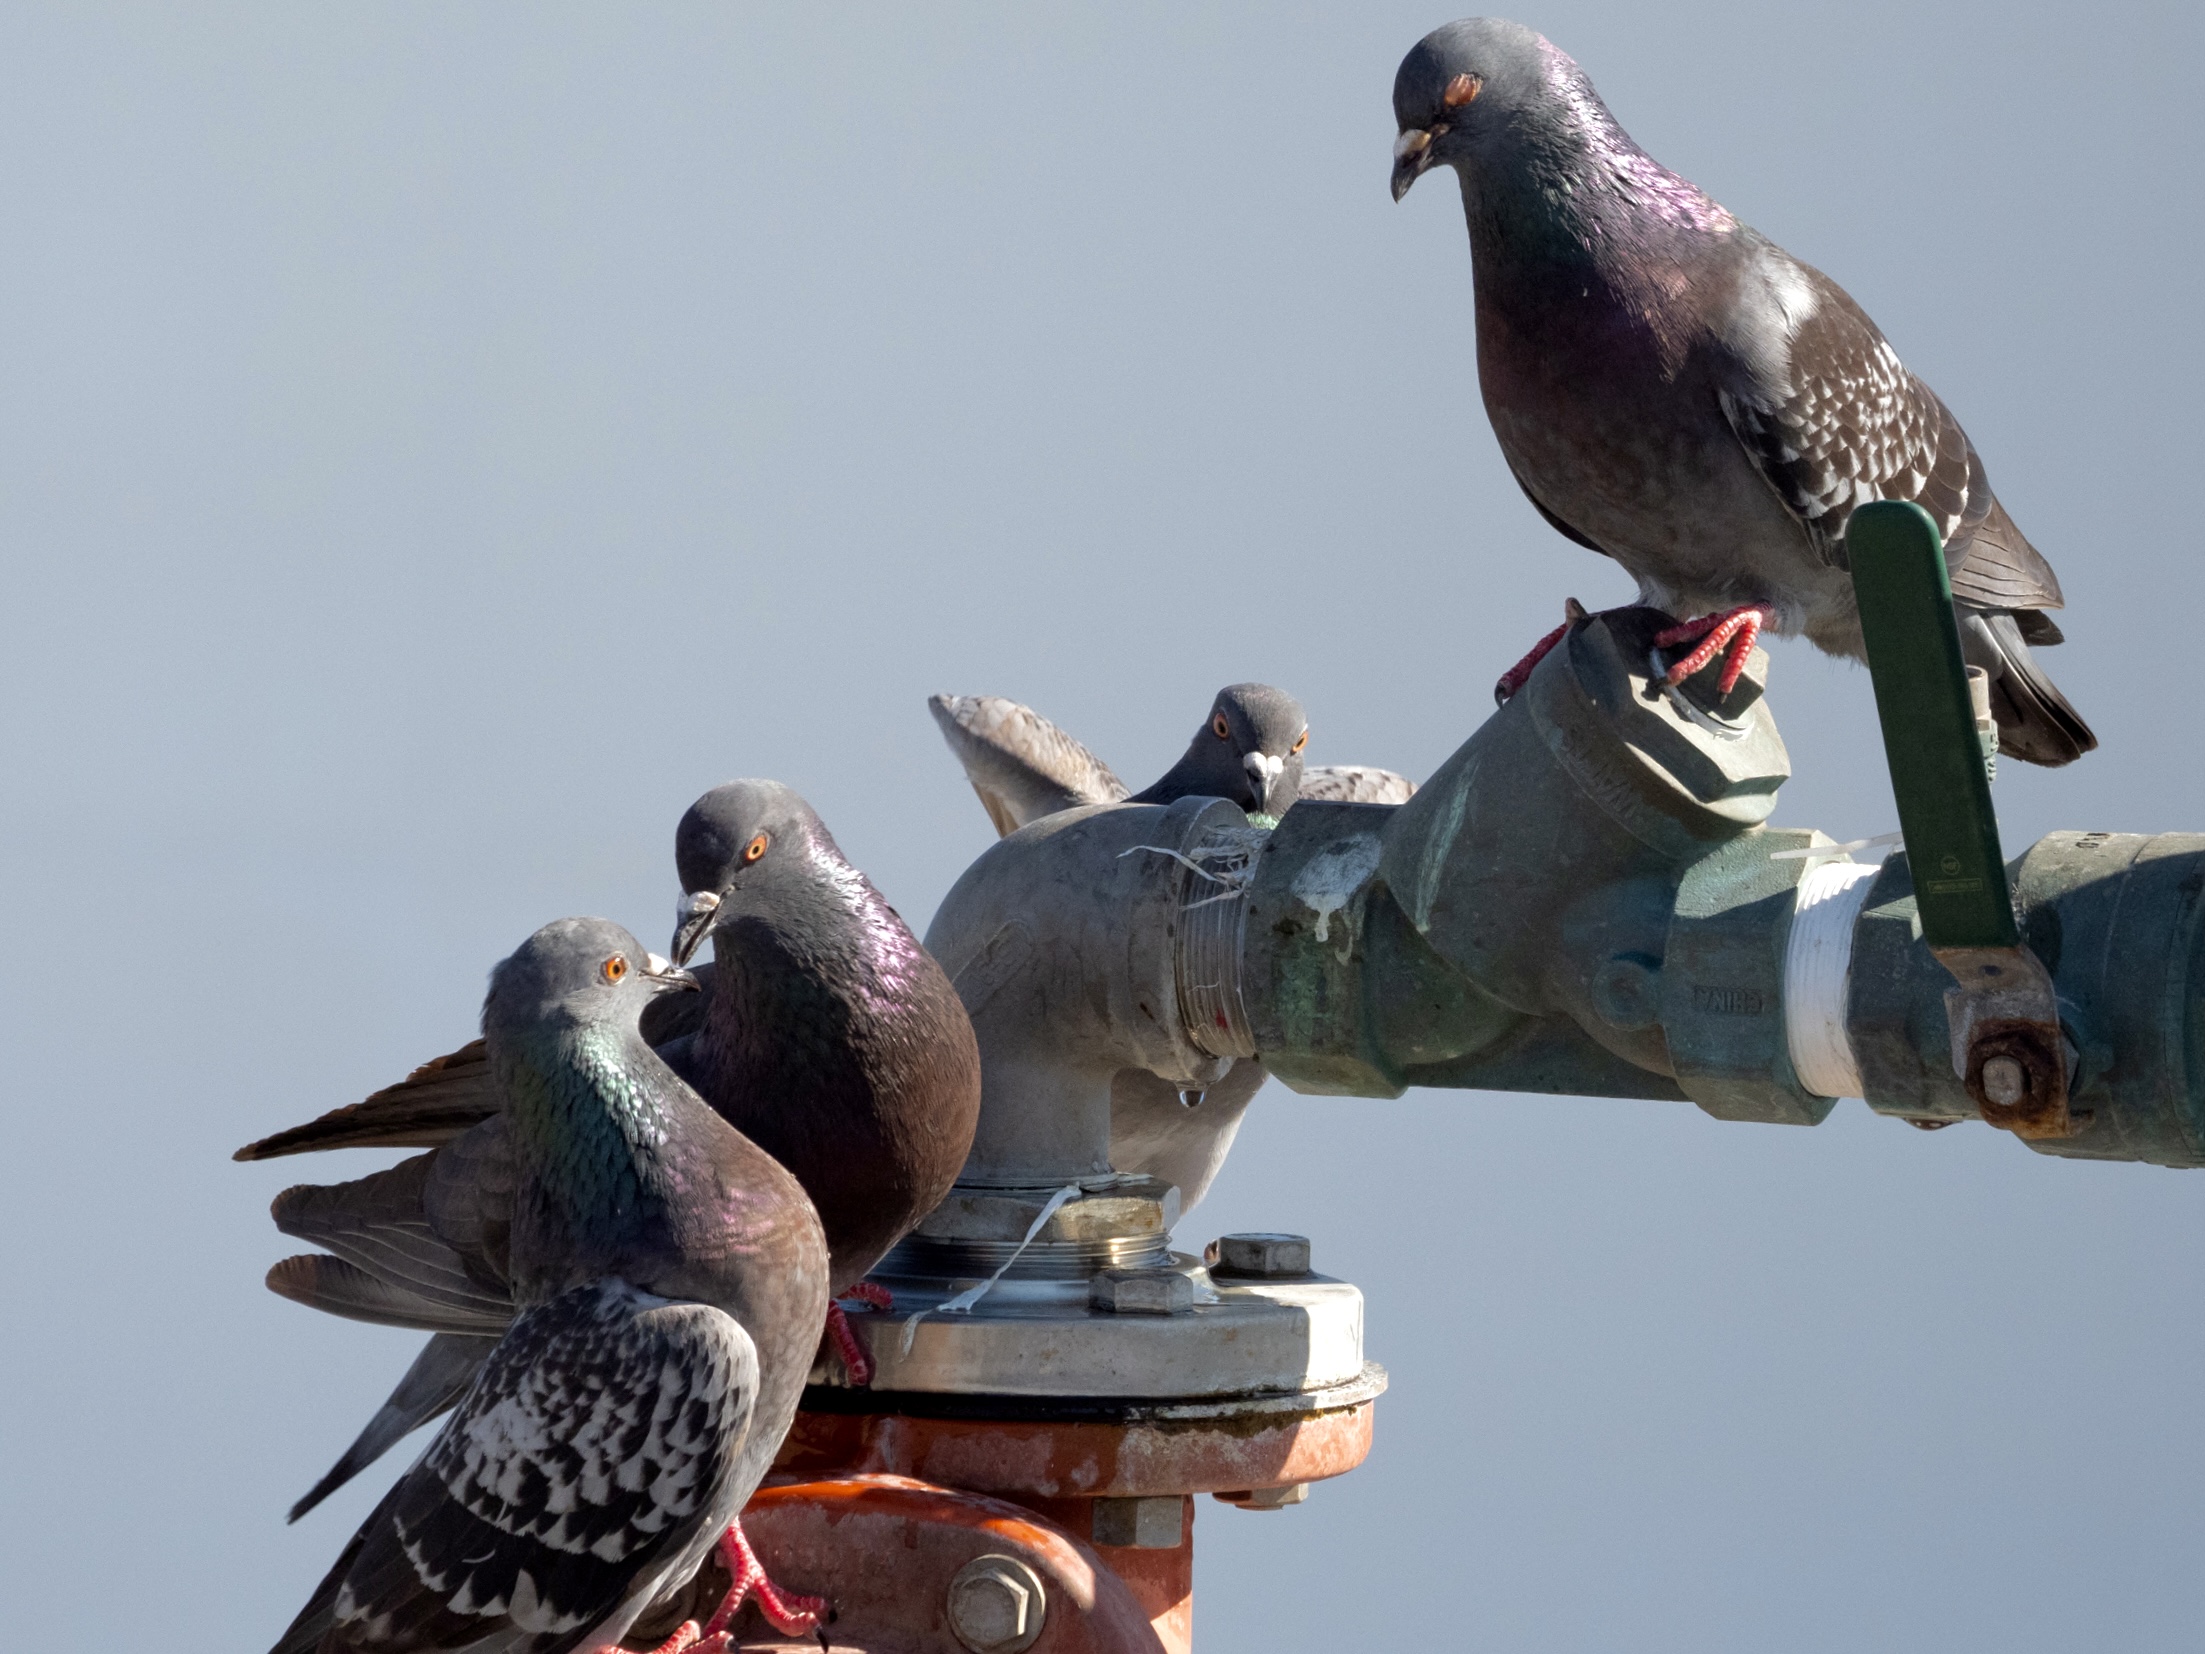 Pigeons Drinking from Commercial Faucet